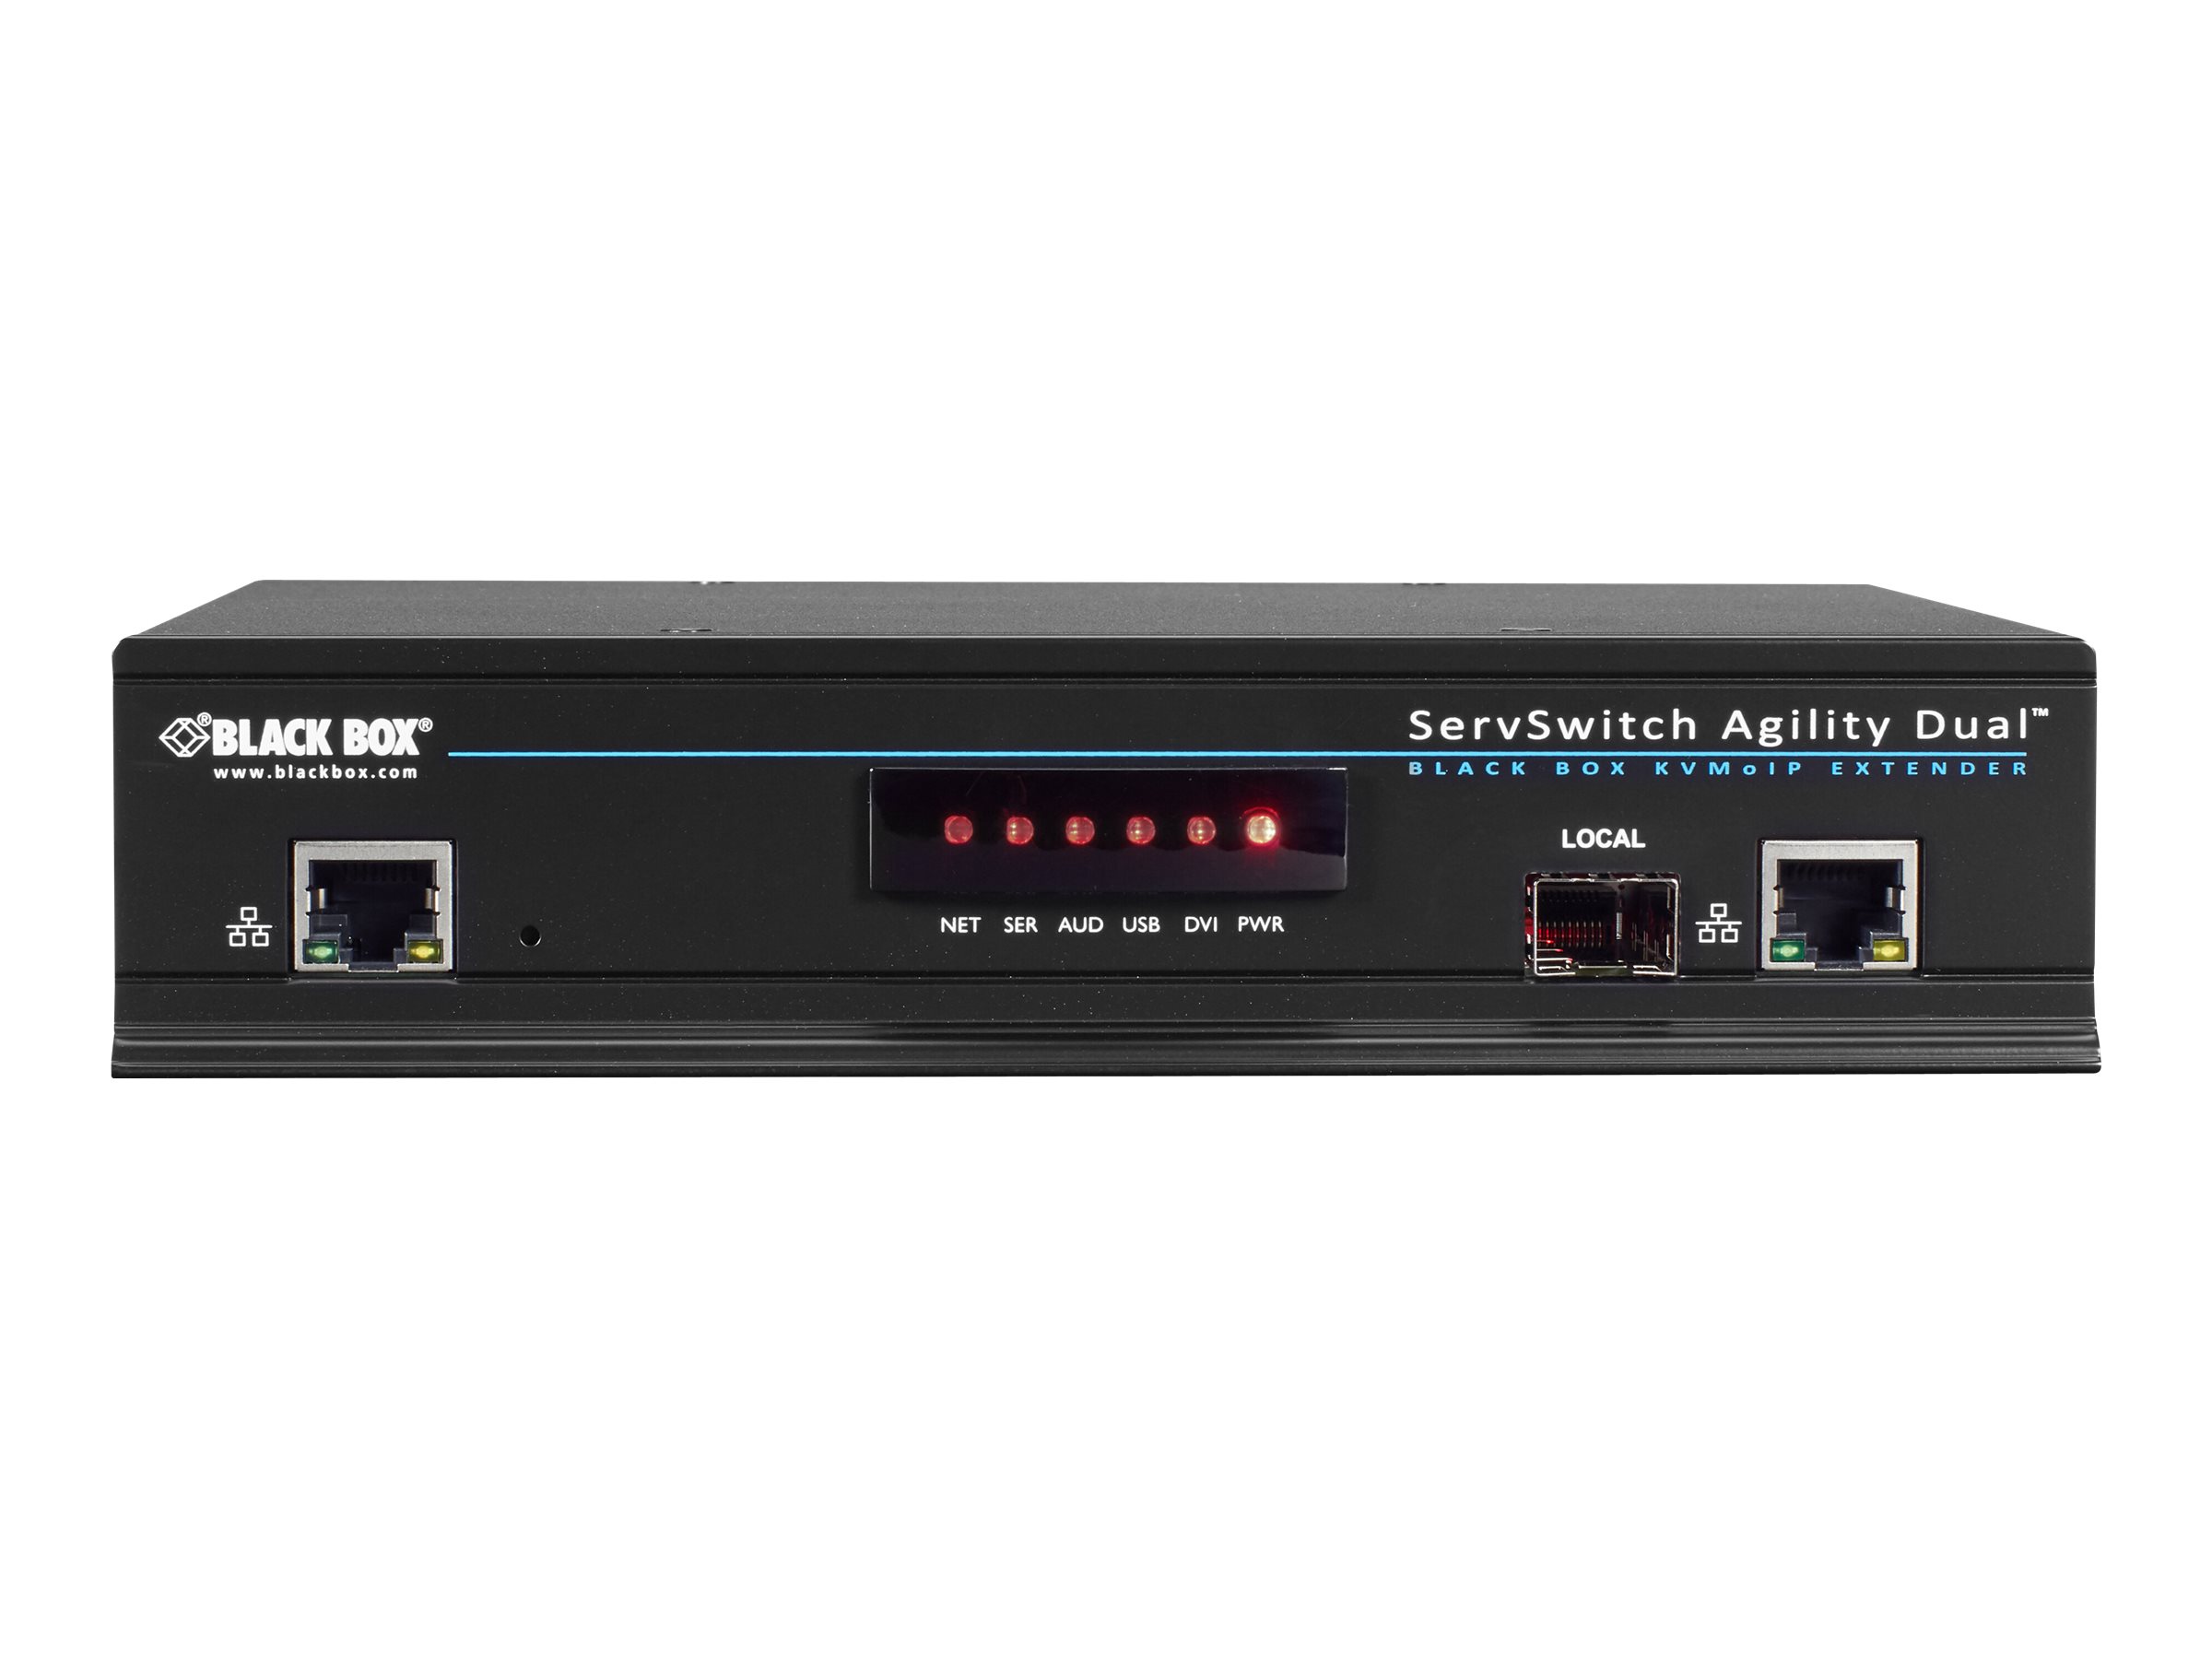 Black Box ServSwitch Agility Dual DVI, USB, and Audio KVM Extender over IP, Dual-Head or Dual-Link, Transmitter